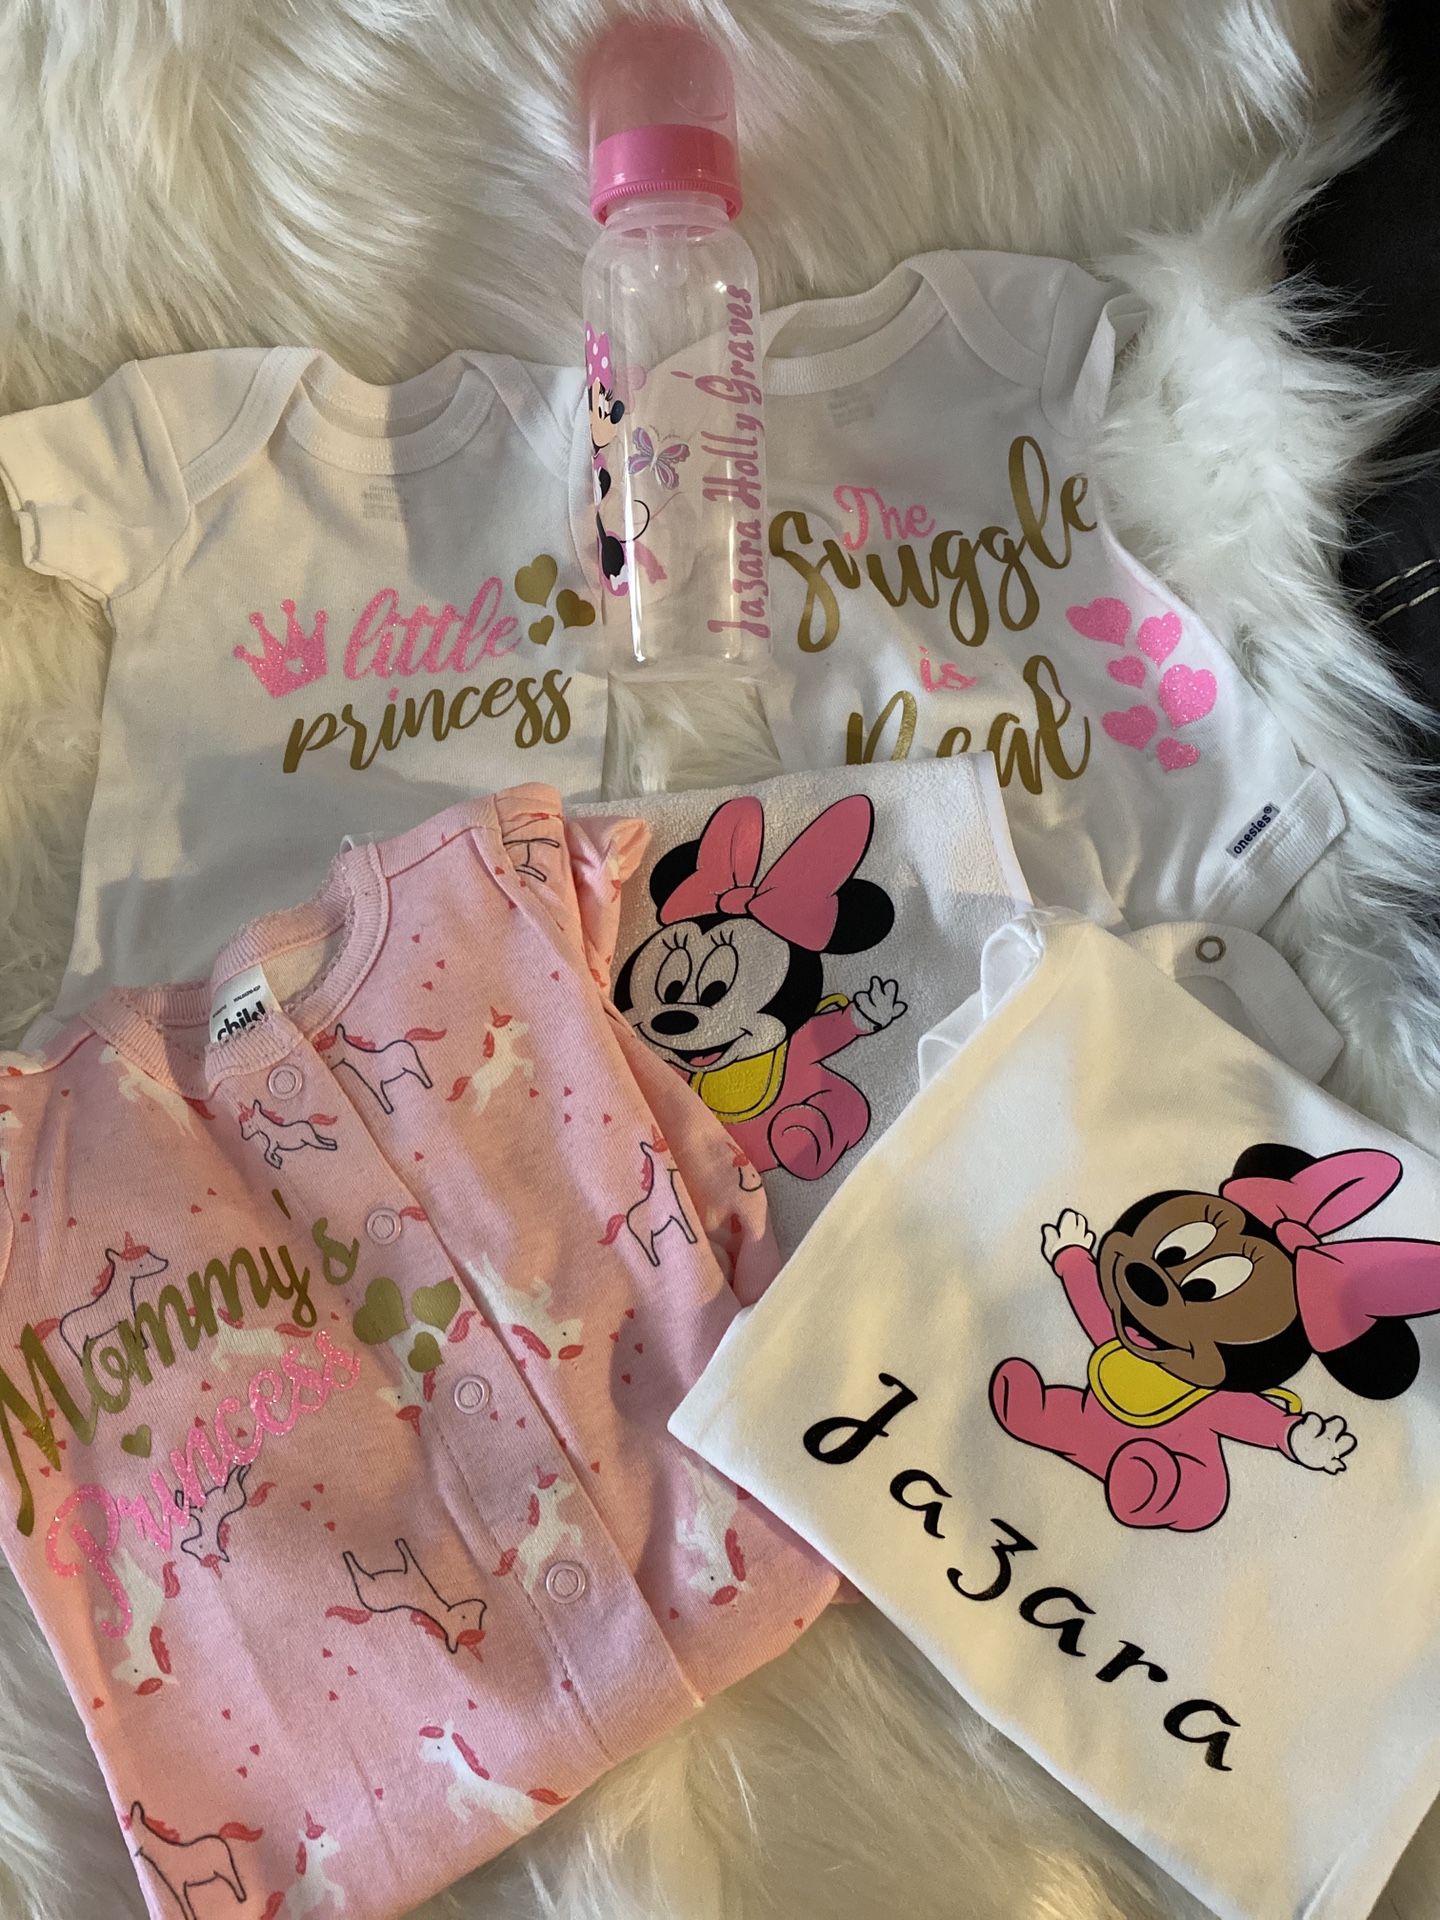 Customized baby onesies and more